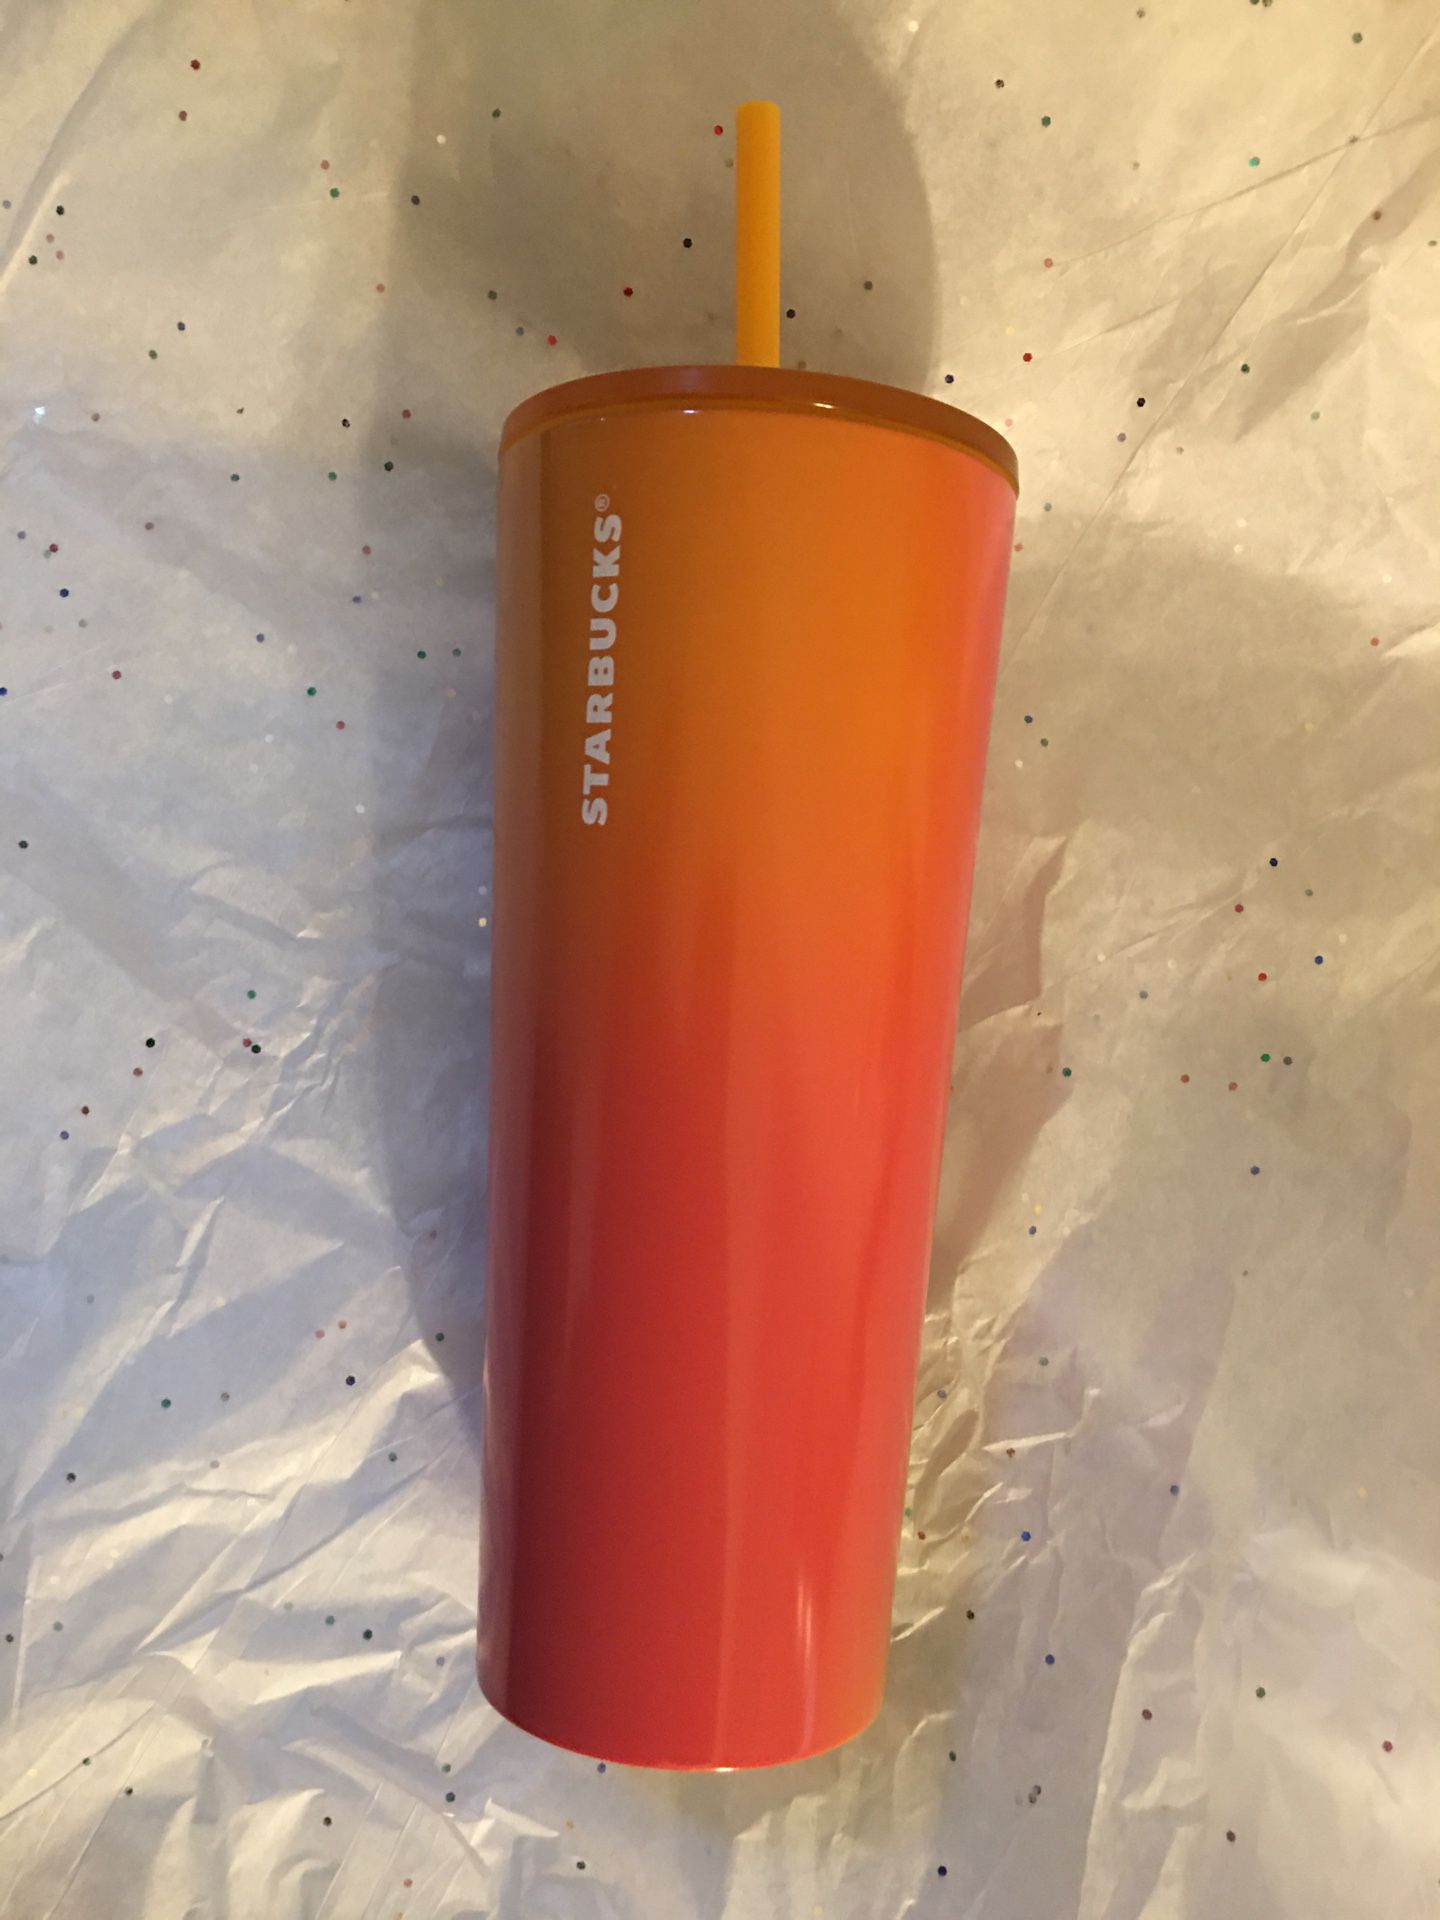 Starbucks Orange Stainless Steel Tumbler Cup New for Sale in Fontana, CA -  OfferUp